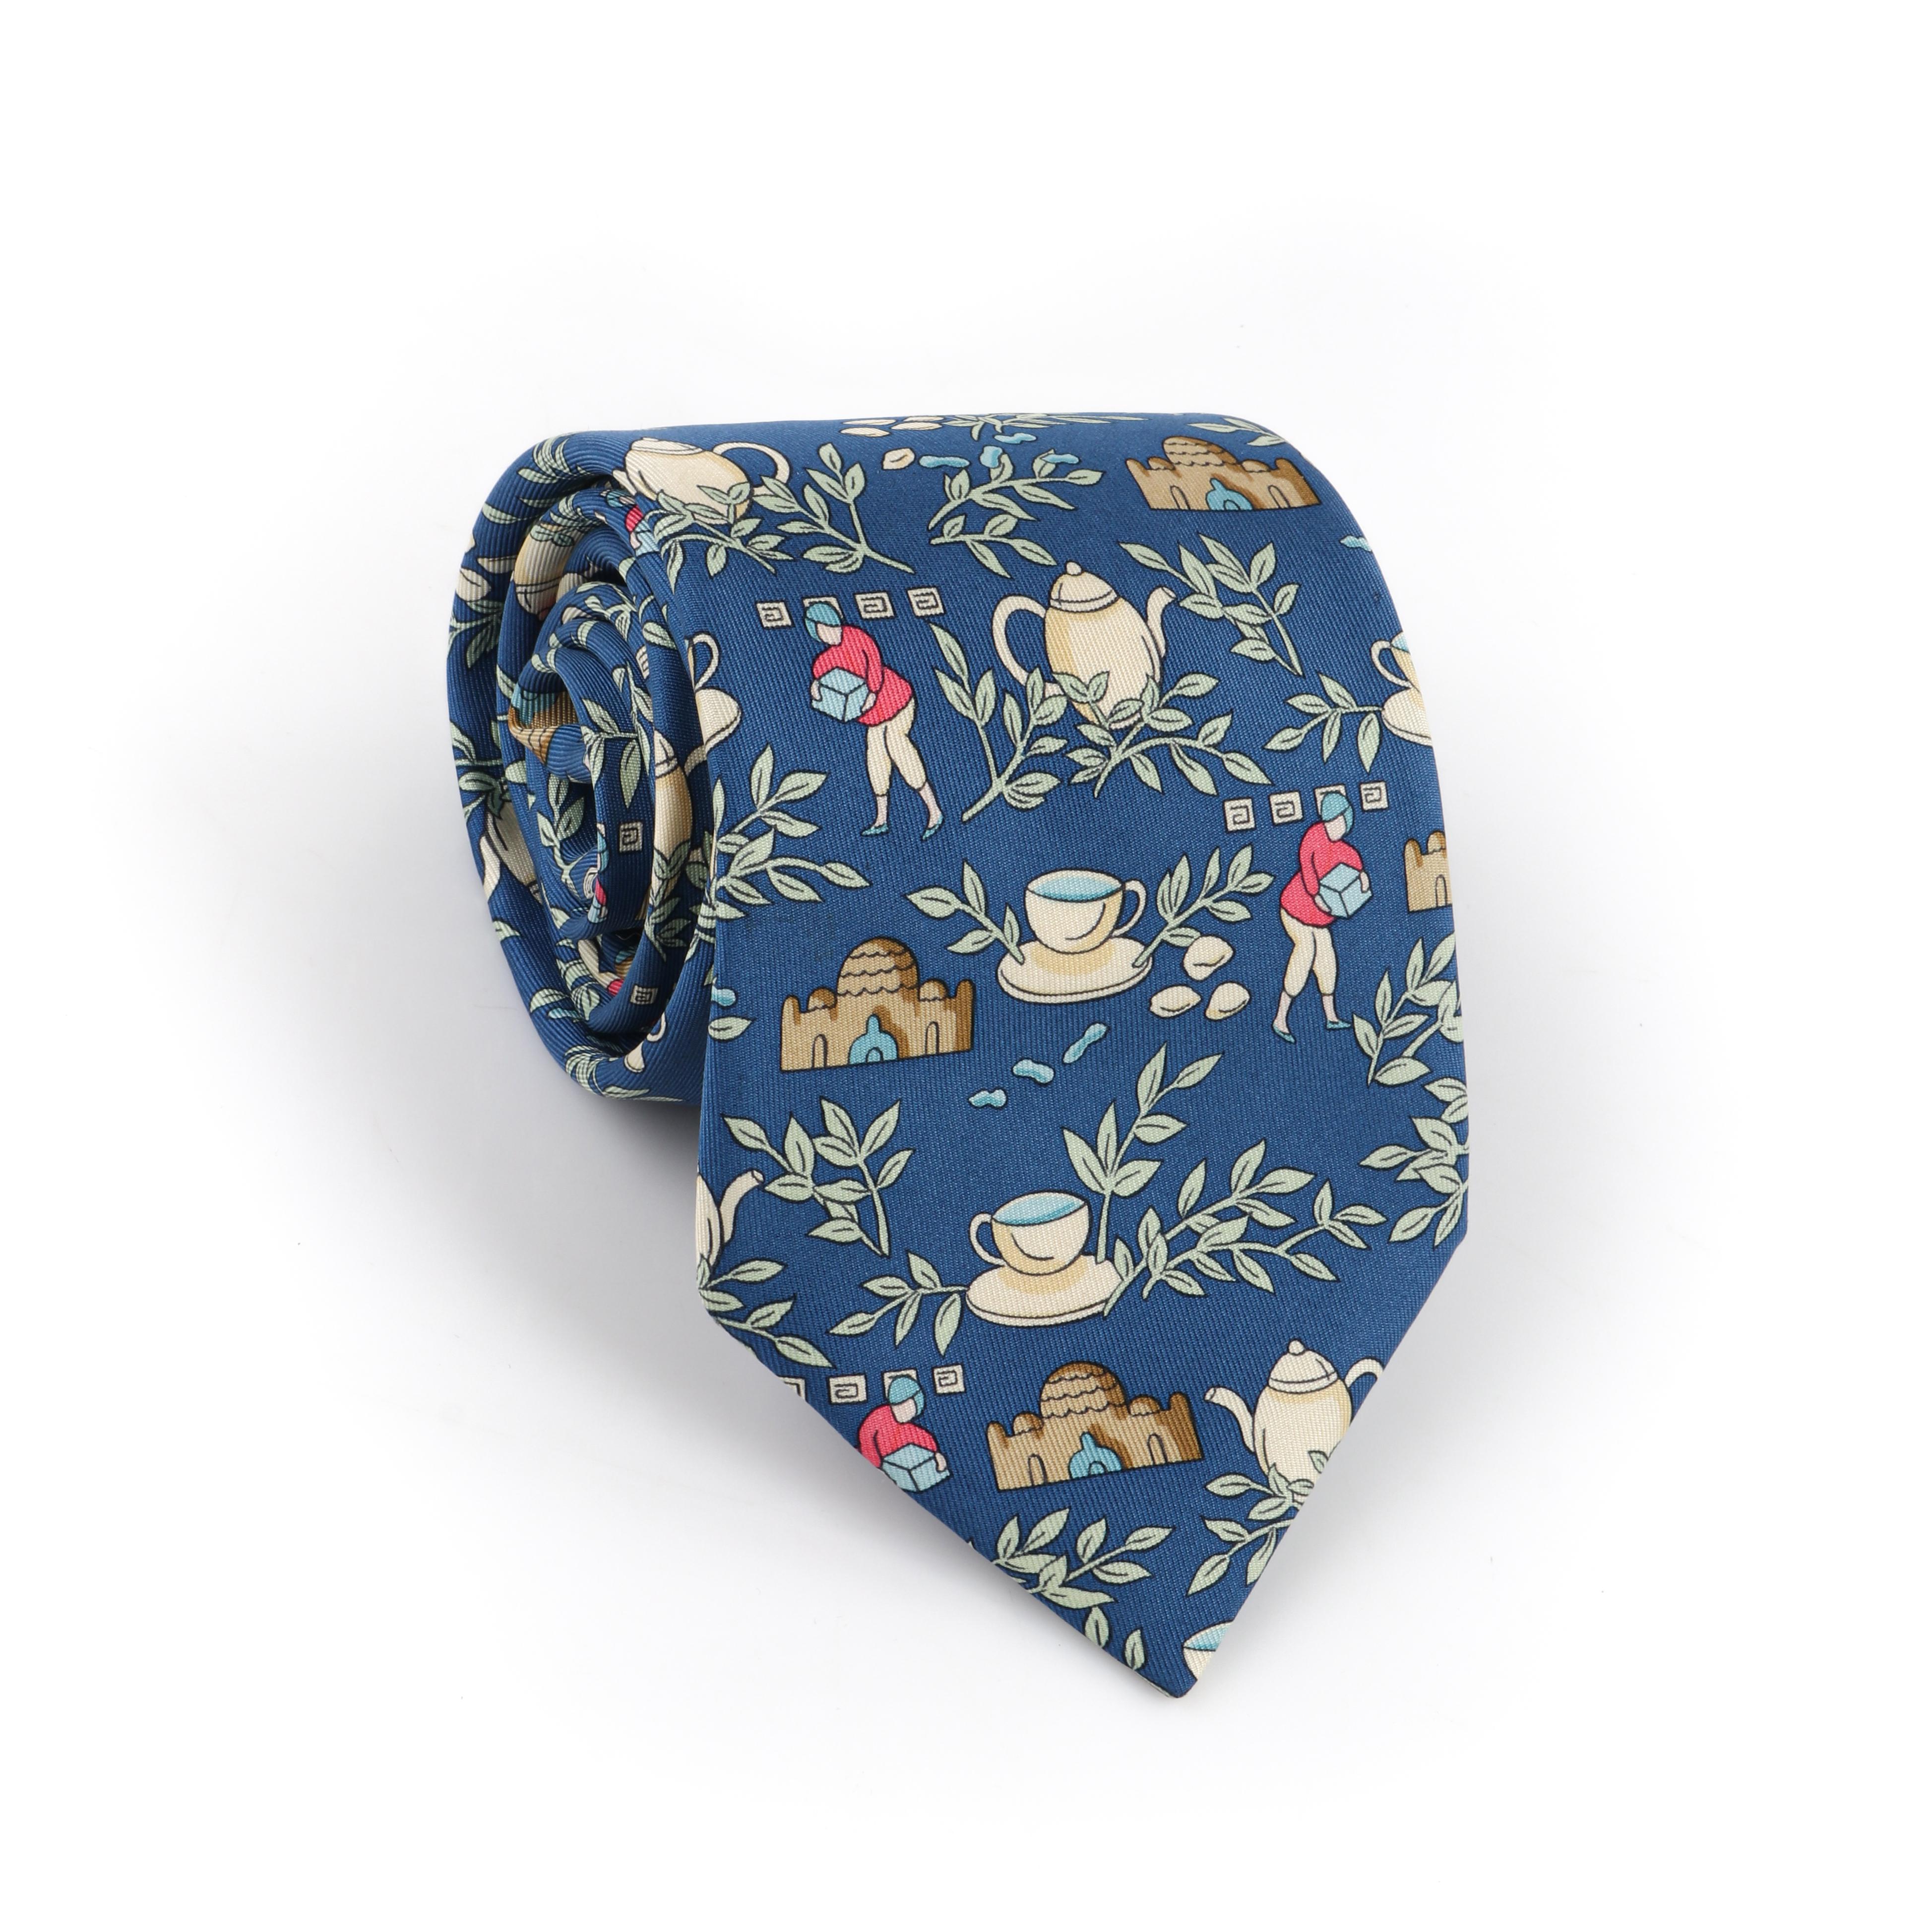 HERMES Men's Blue Multicolor Tea Set & Tea Leaf Branch Silk Necktie Tie 7501 IA
 
Brand/Manufacturer: Hermes
Style: 5-Fold necktie
Color(s): Shades of blue, green, cream, beige, tan, pink
Lined: Yes
Marked Fabric Content: “100% Silk”  
Additional